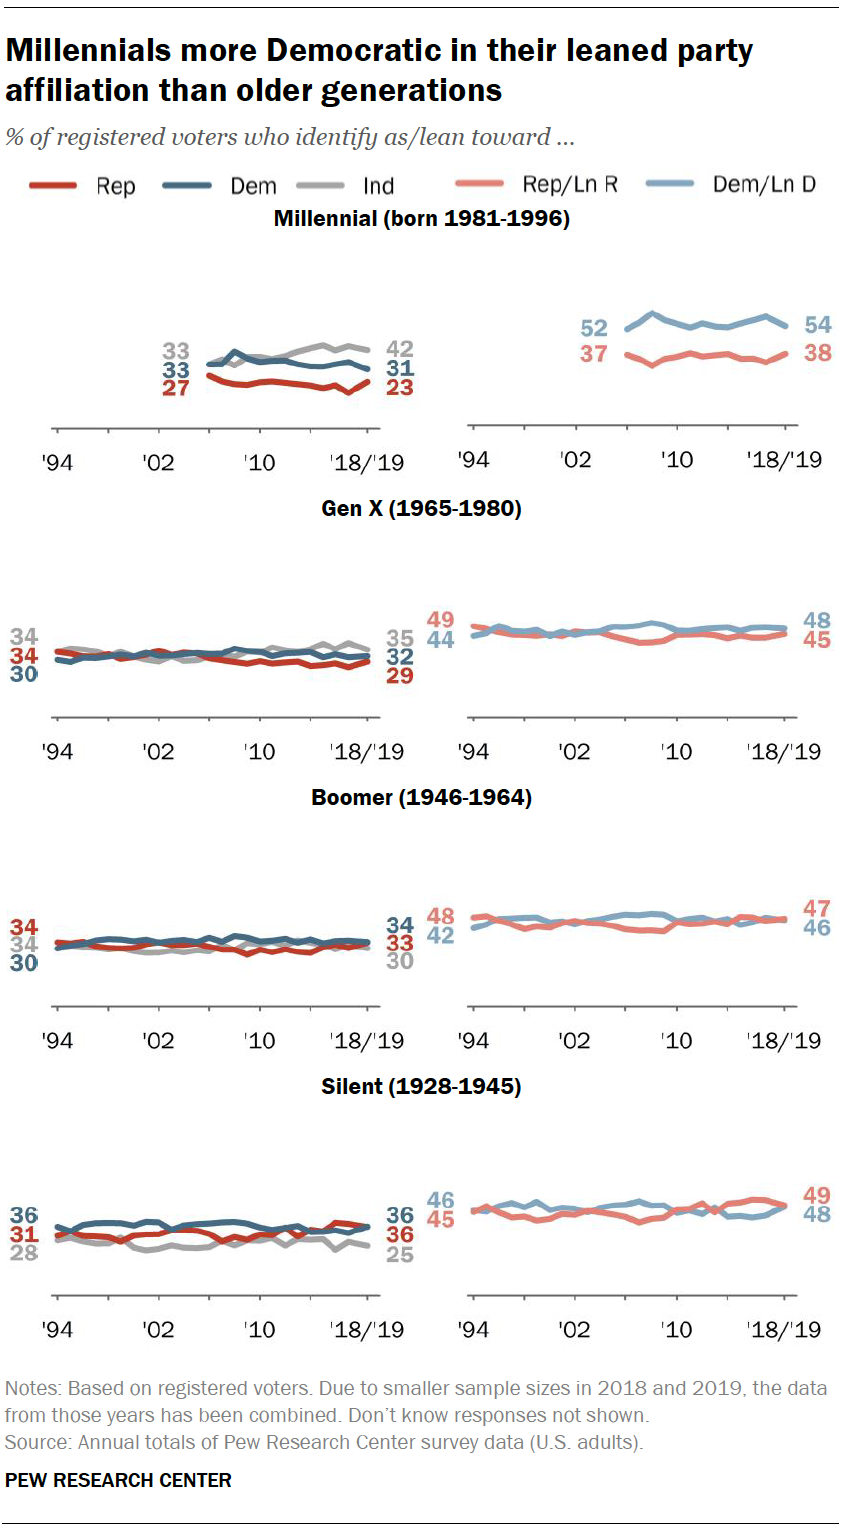 Millennials more Democratic in their leaned party affiliation than older generations